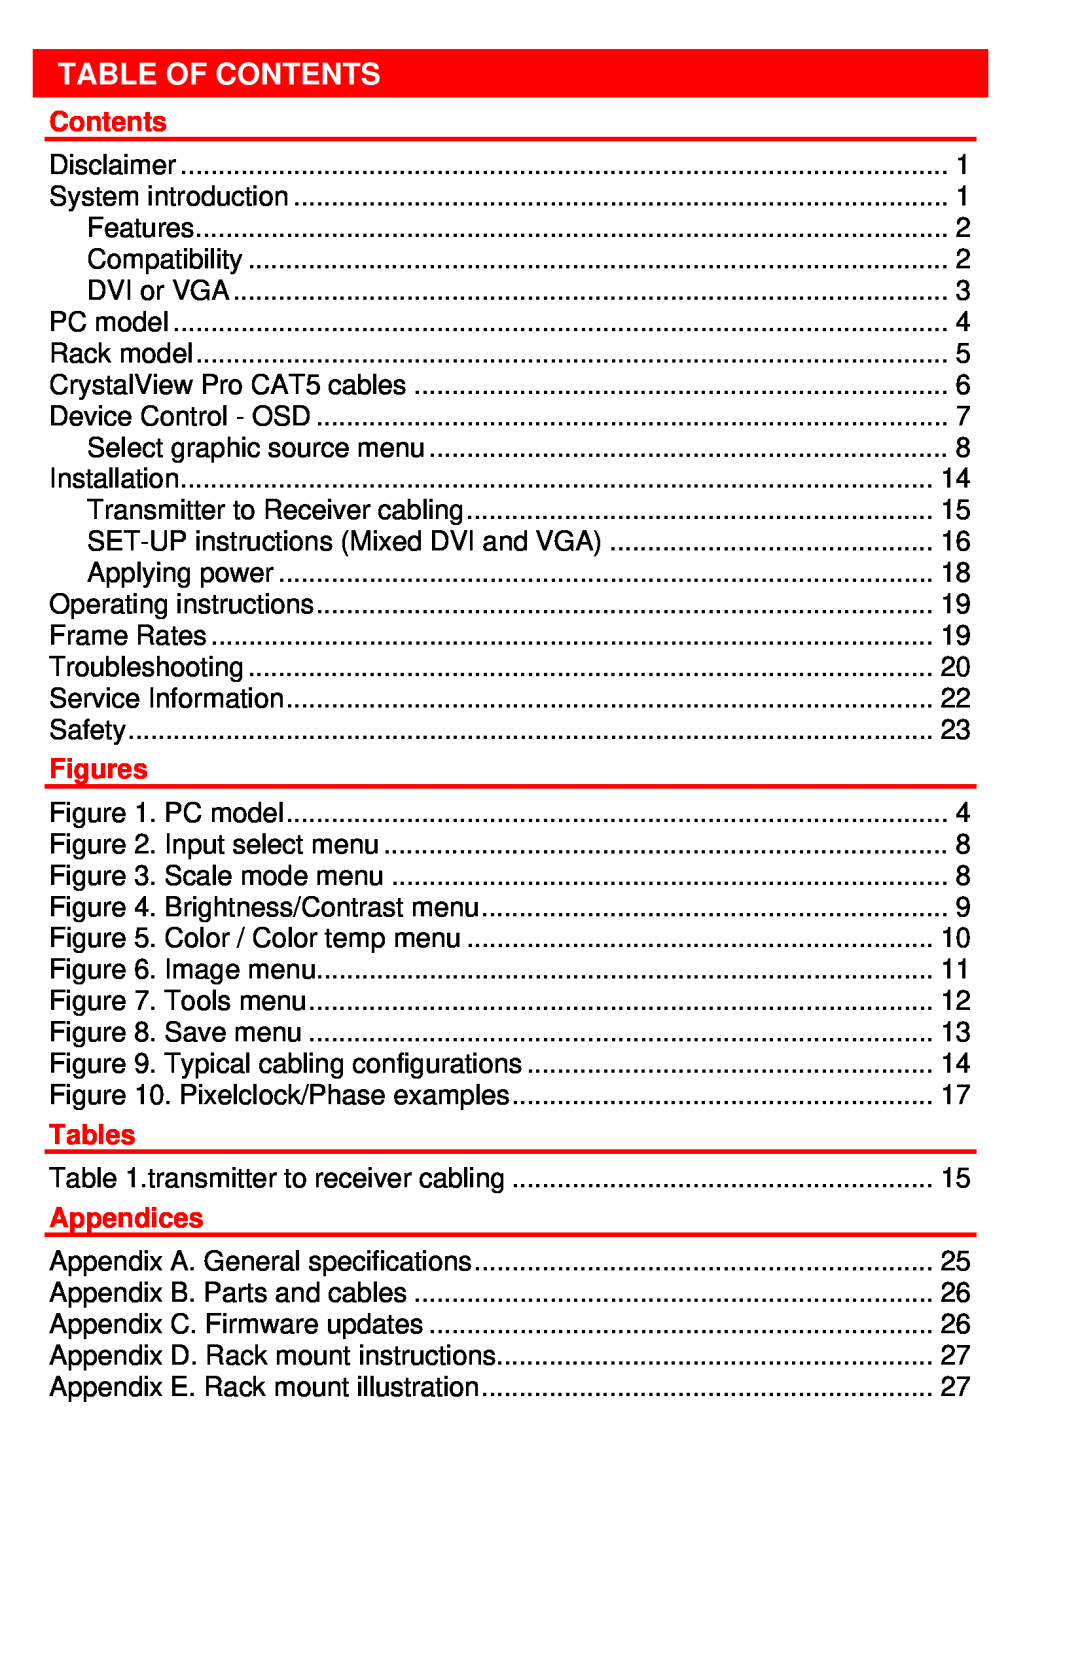 Rose electronic CAT5 manual Table Of Contents, Figures, Tables, Appendices 